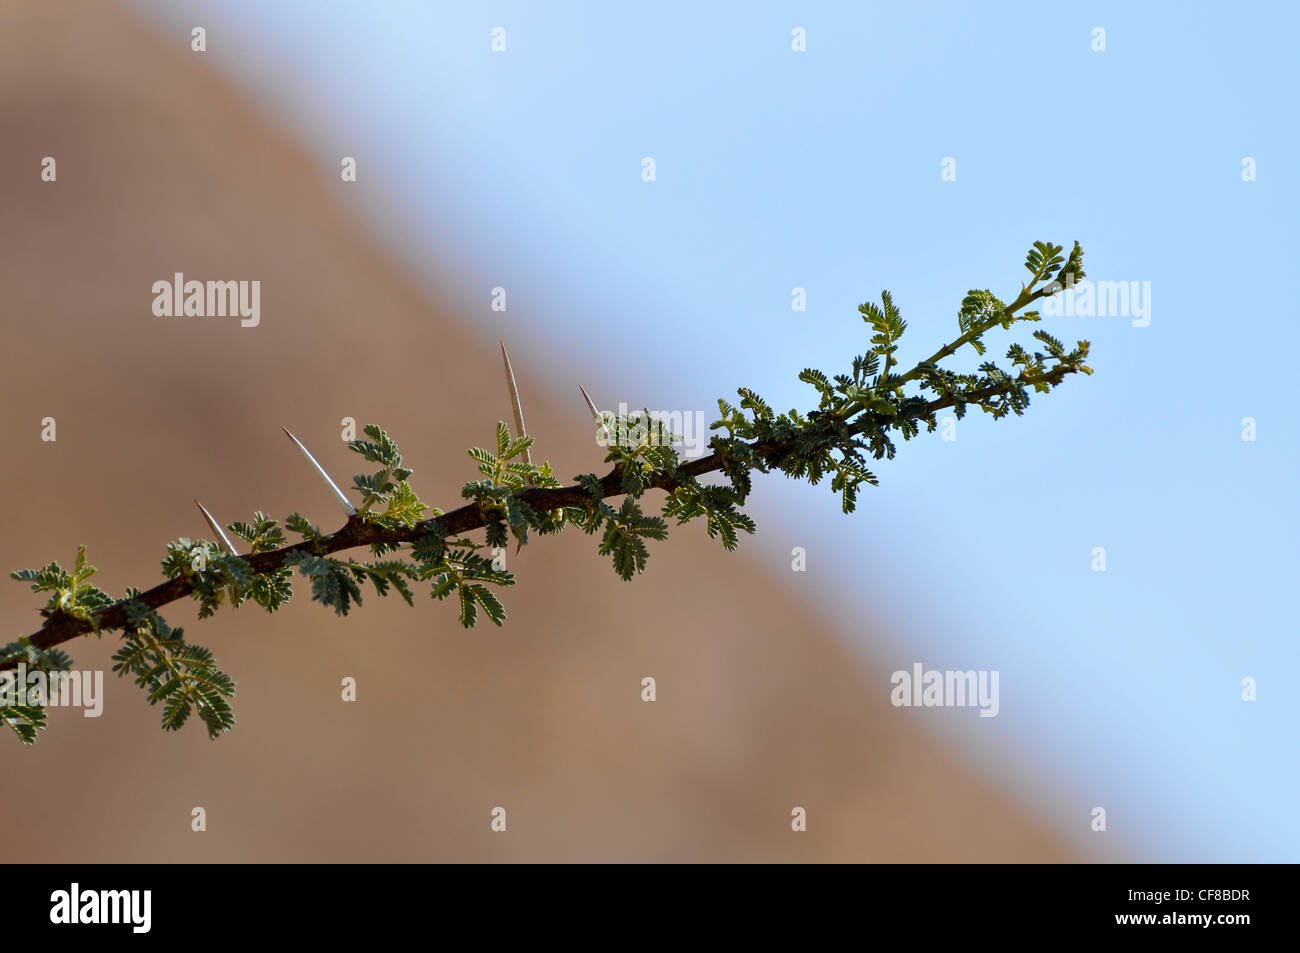 Close up of the branch and thorns of an Umbrella Thorn Acacia, (Acacia tortilis) Photographed in Israel, Arava desert Stock Photo